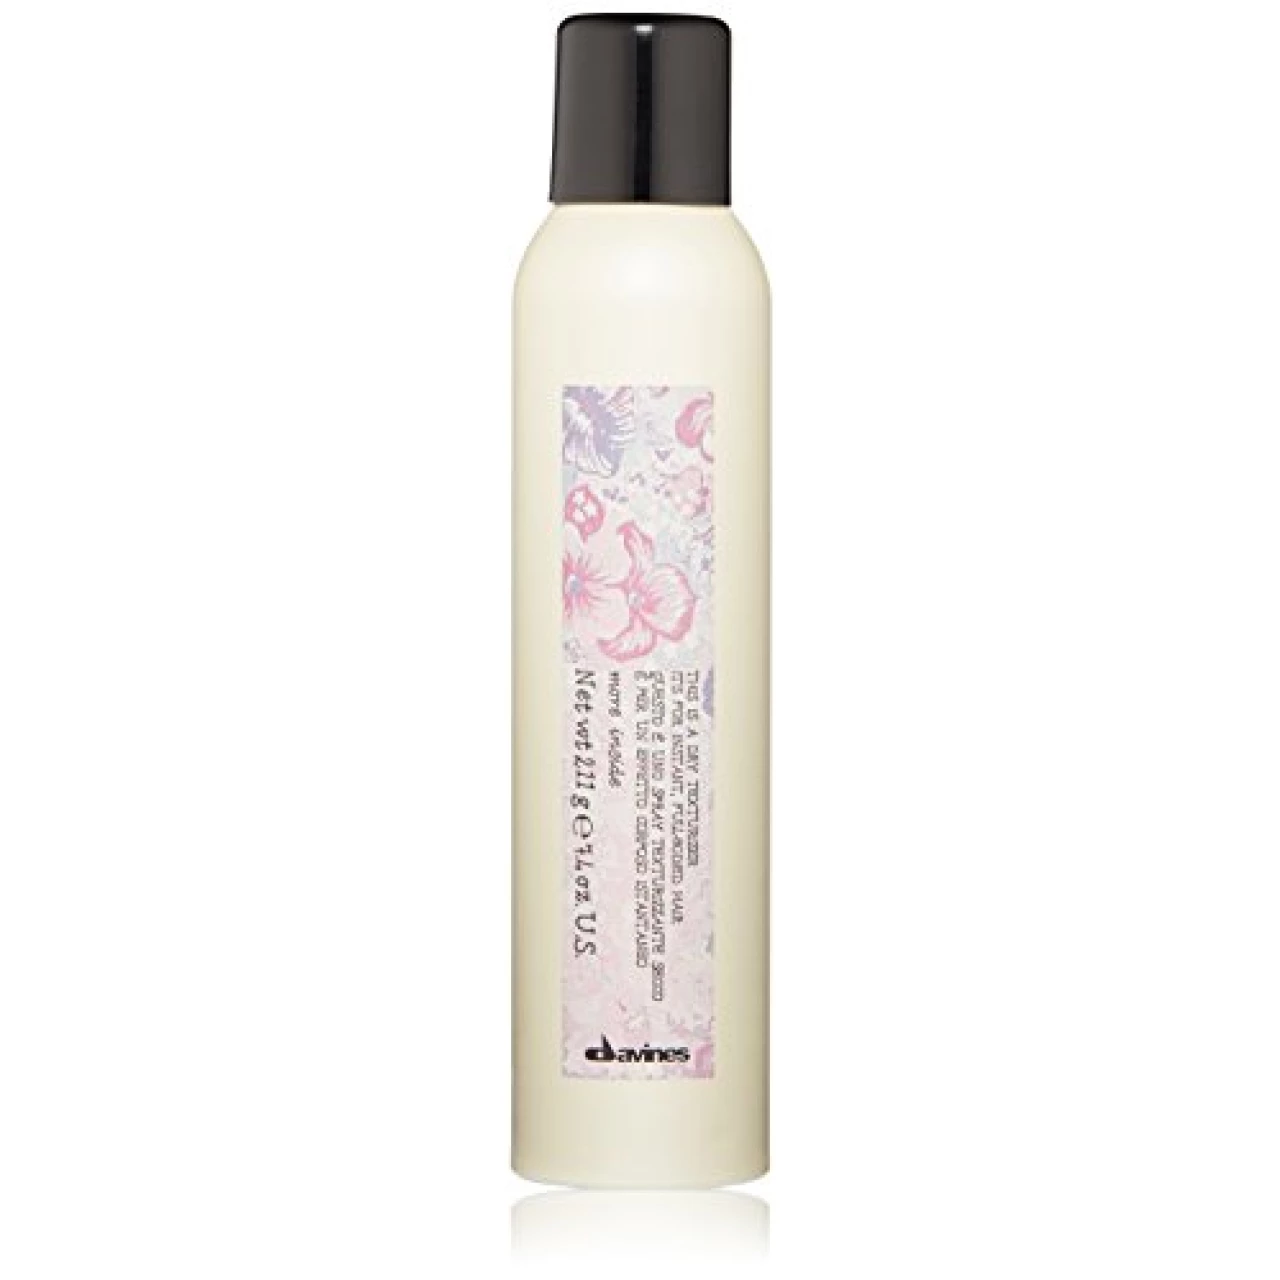 Davines This Is A Dry Texturizer | Texturizing Spray for Full Bodied Hair with Volume, Strong Hold, and Tousled Look | 7.4 oz